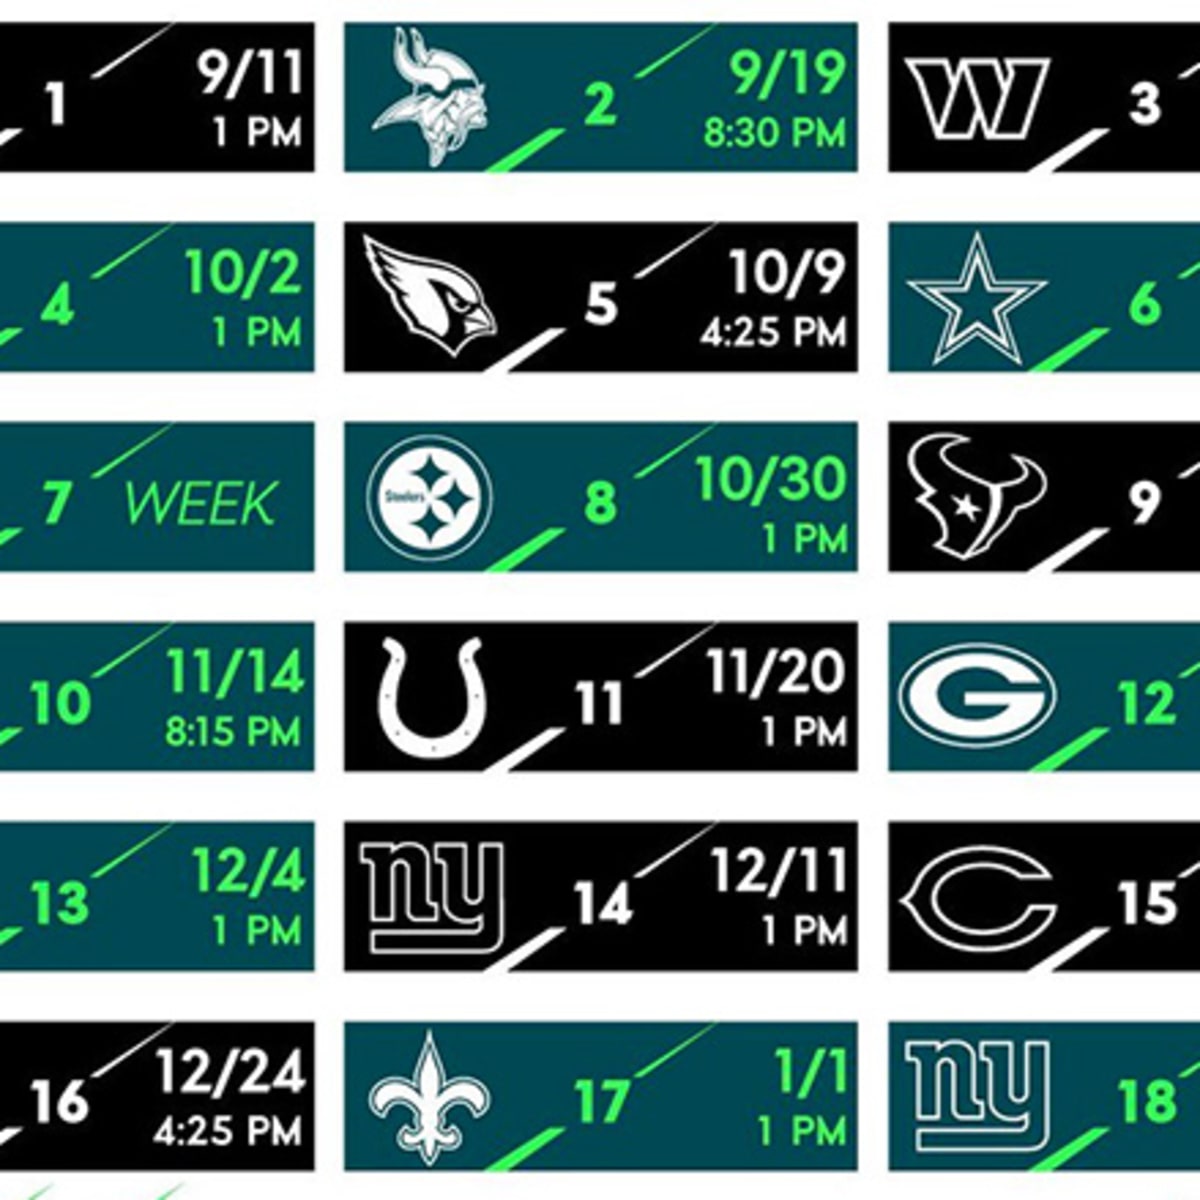 eagles game day schedule